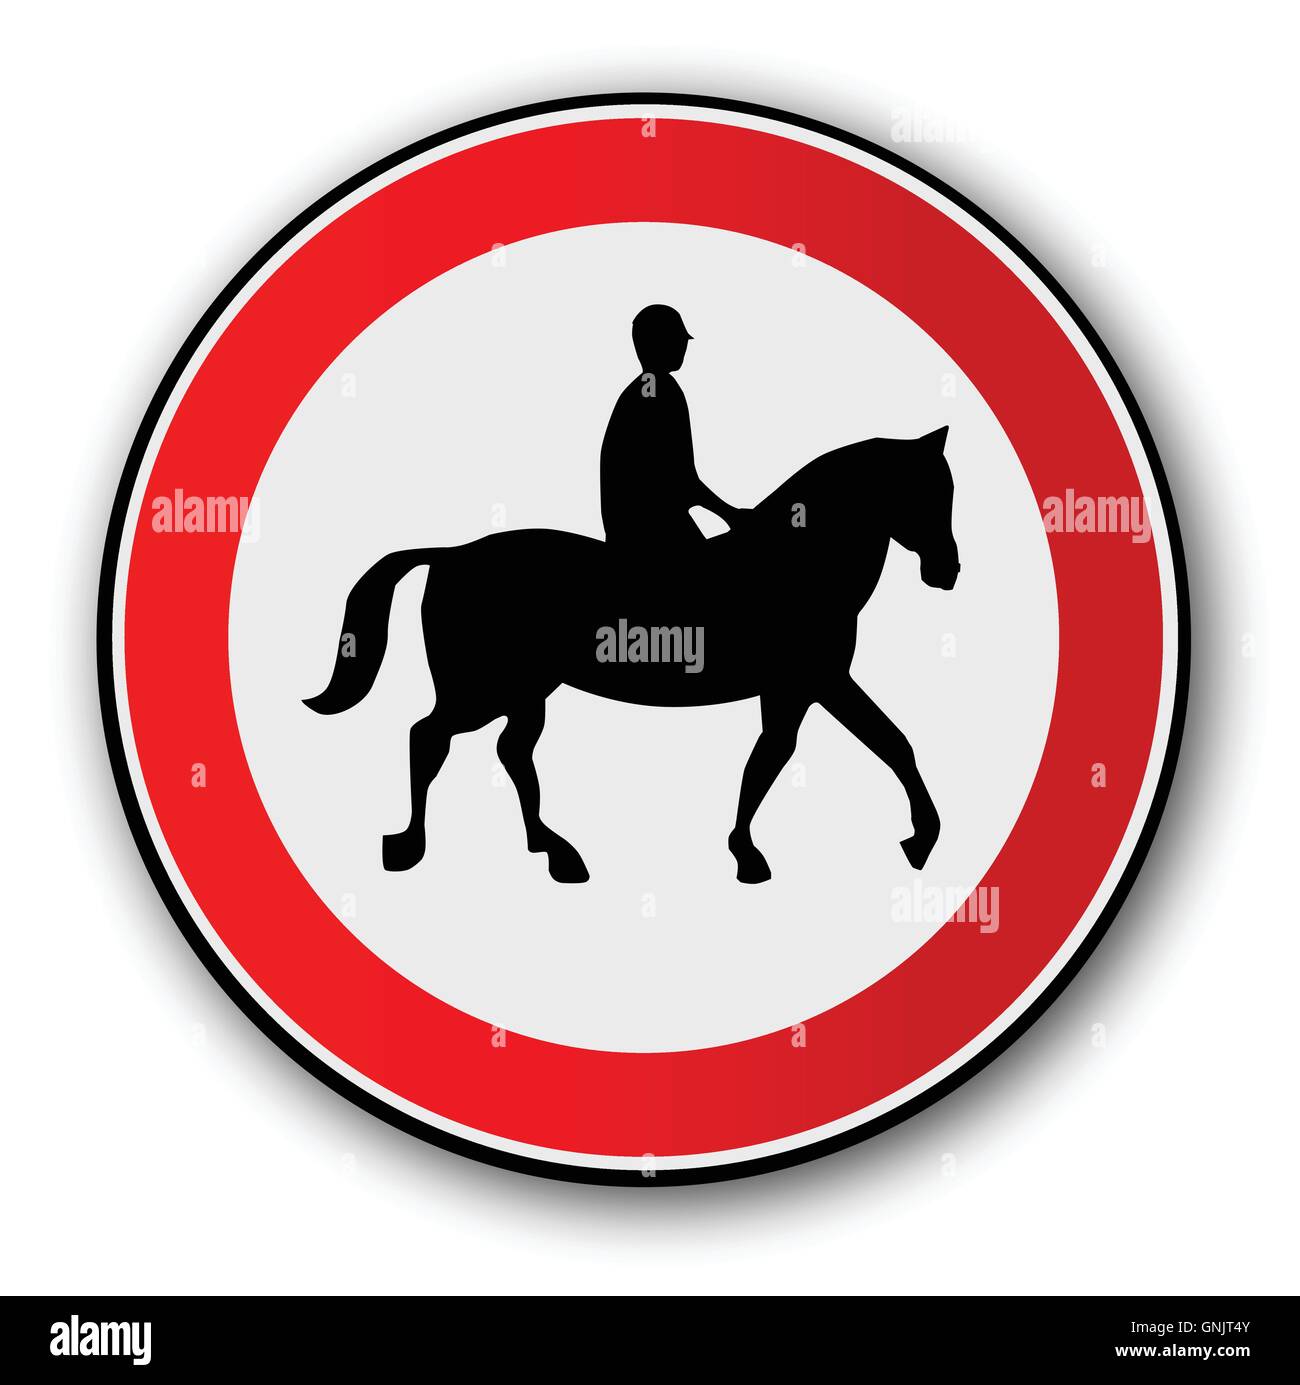 Horse and Rider Road Traffic Sign Stock Vector